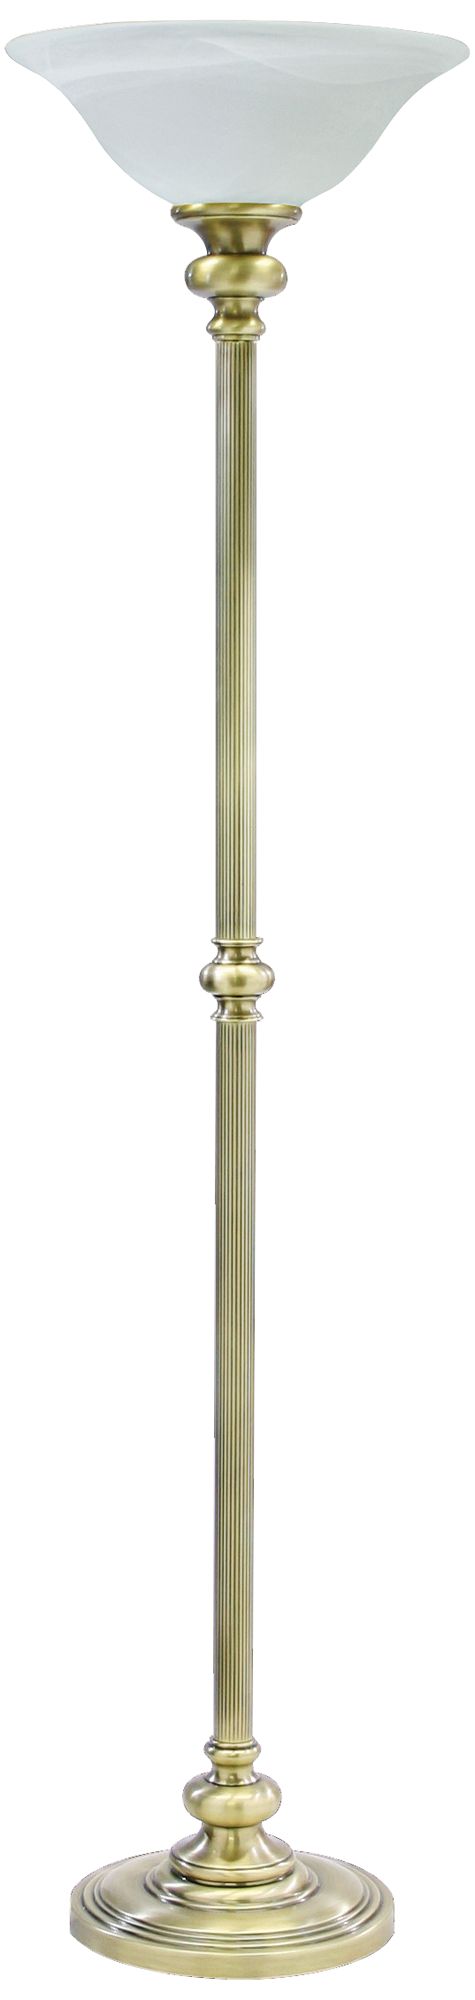 house of troy newport torchiere floor lamp in antique brass QEIPXTT